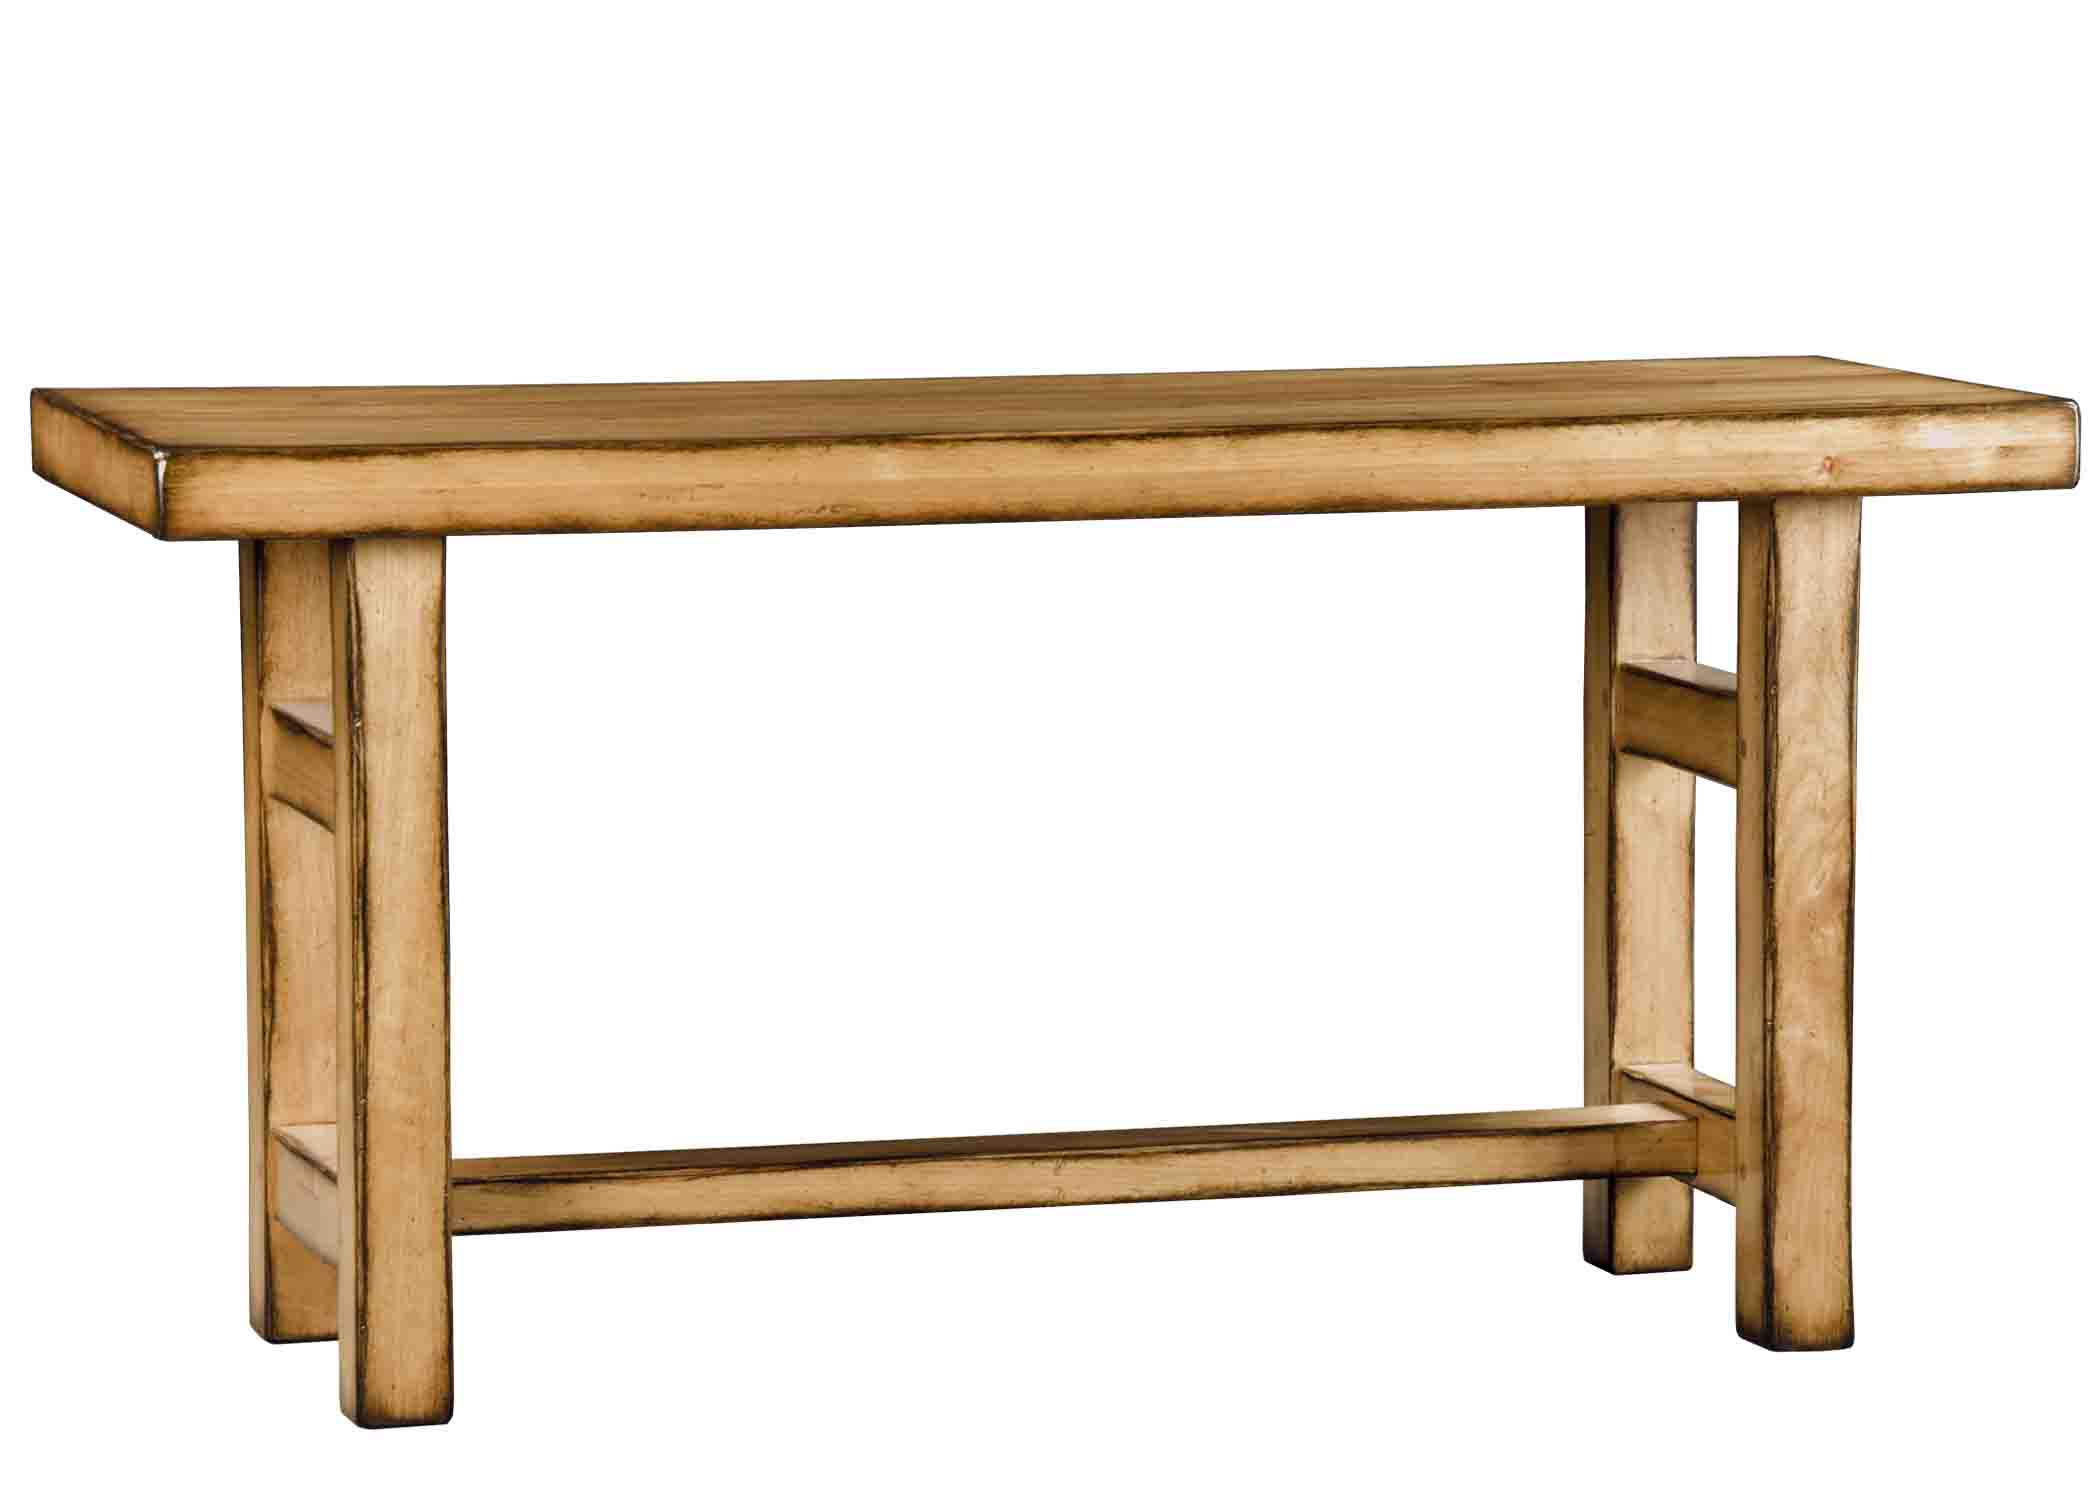 Camden modern rustic transitional sofa table console